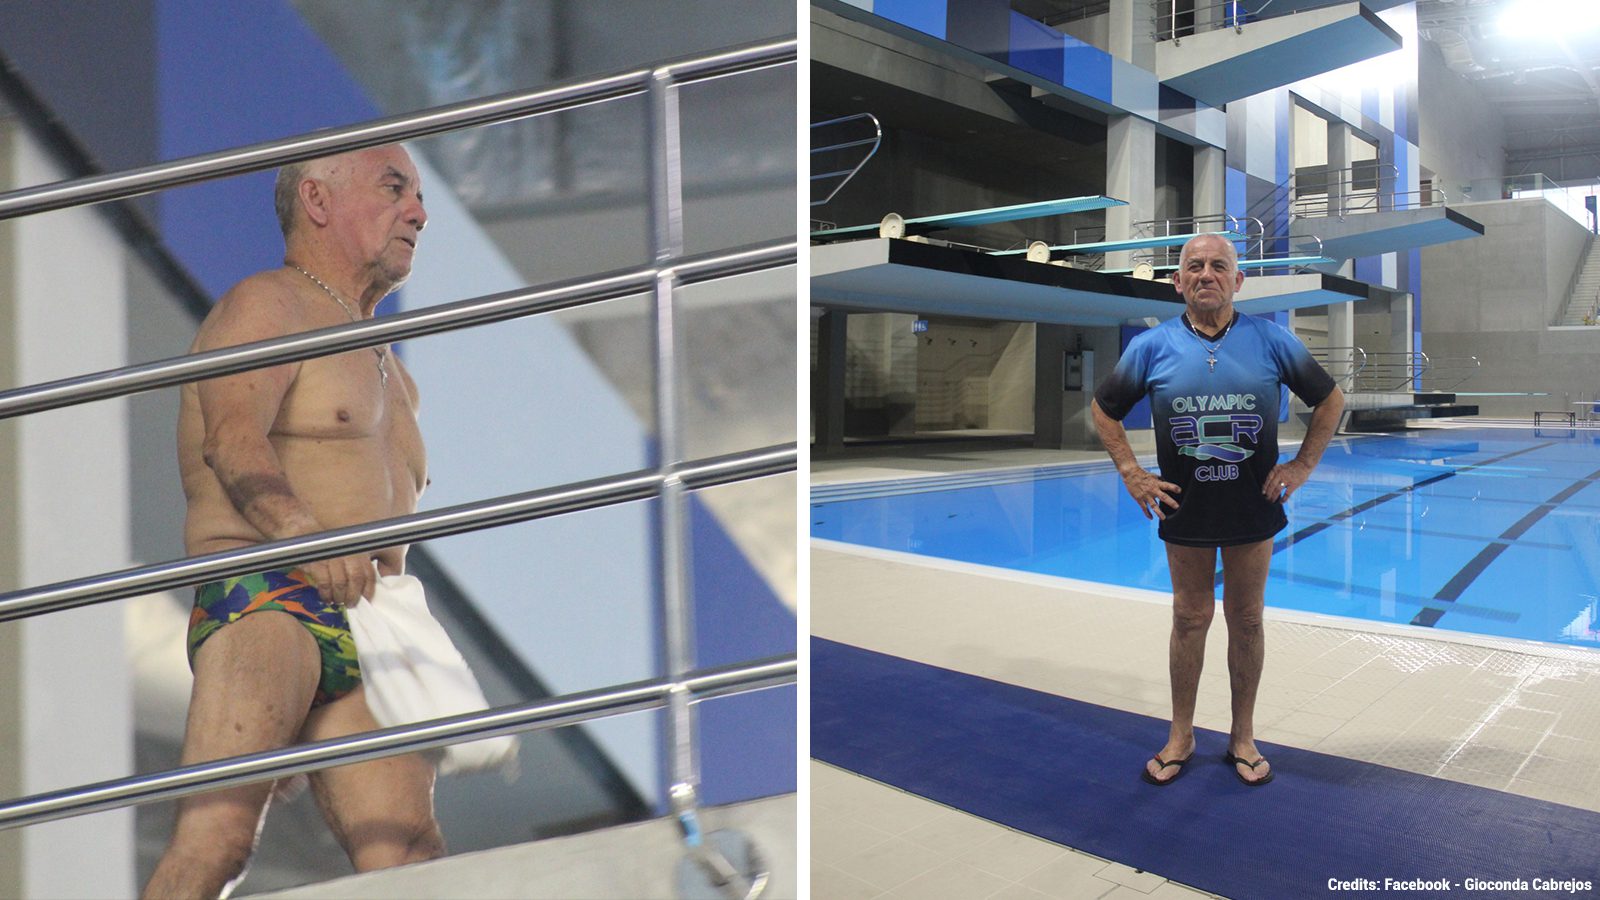 71-Year-Old Wins Diving Gold Medal, Vows to Compete Until 90